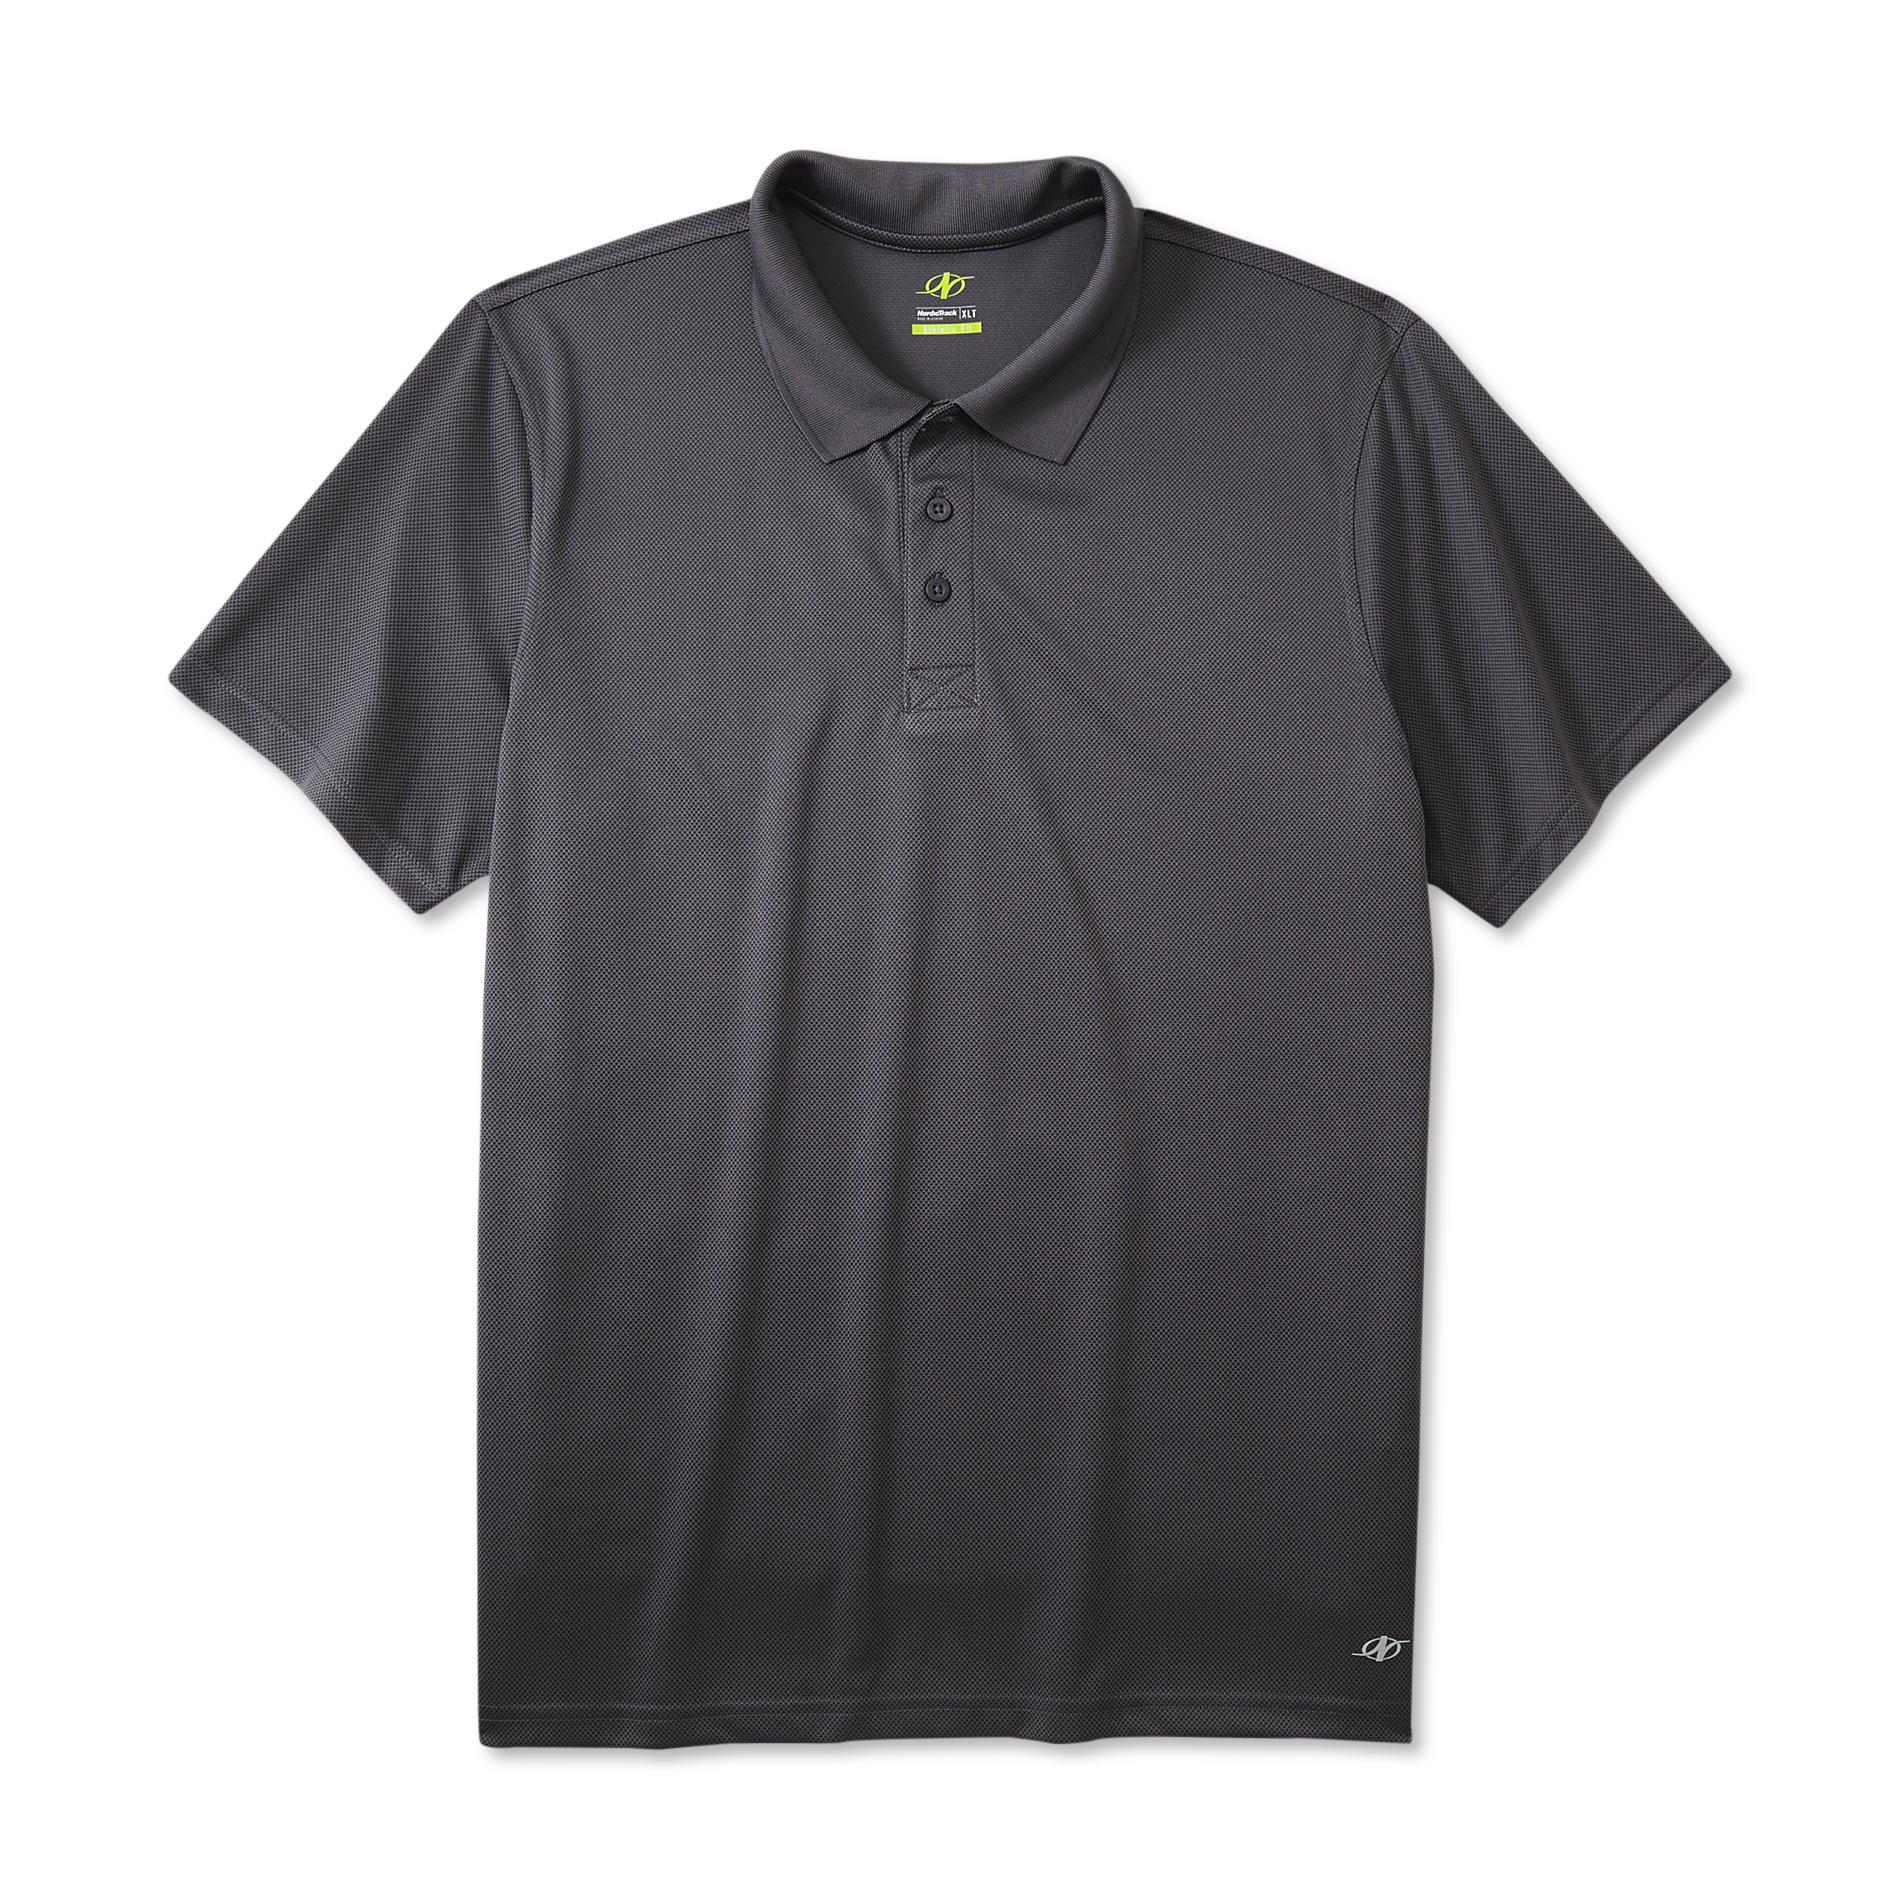 Outdoor Life Men's Athletic Fit Polo Shirt